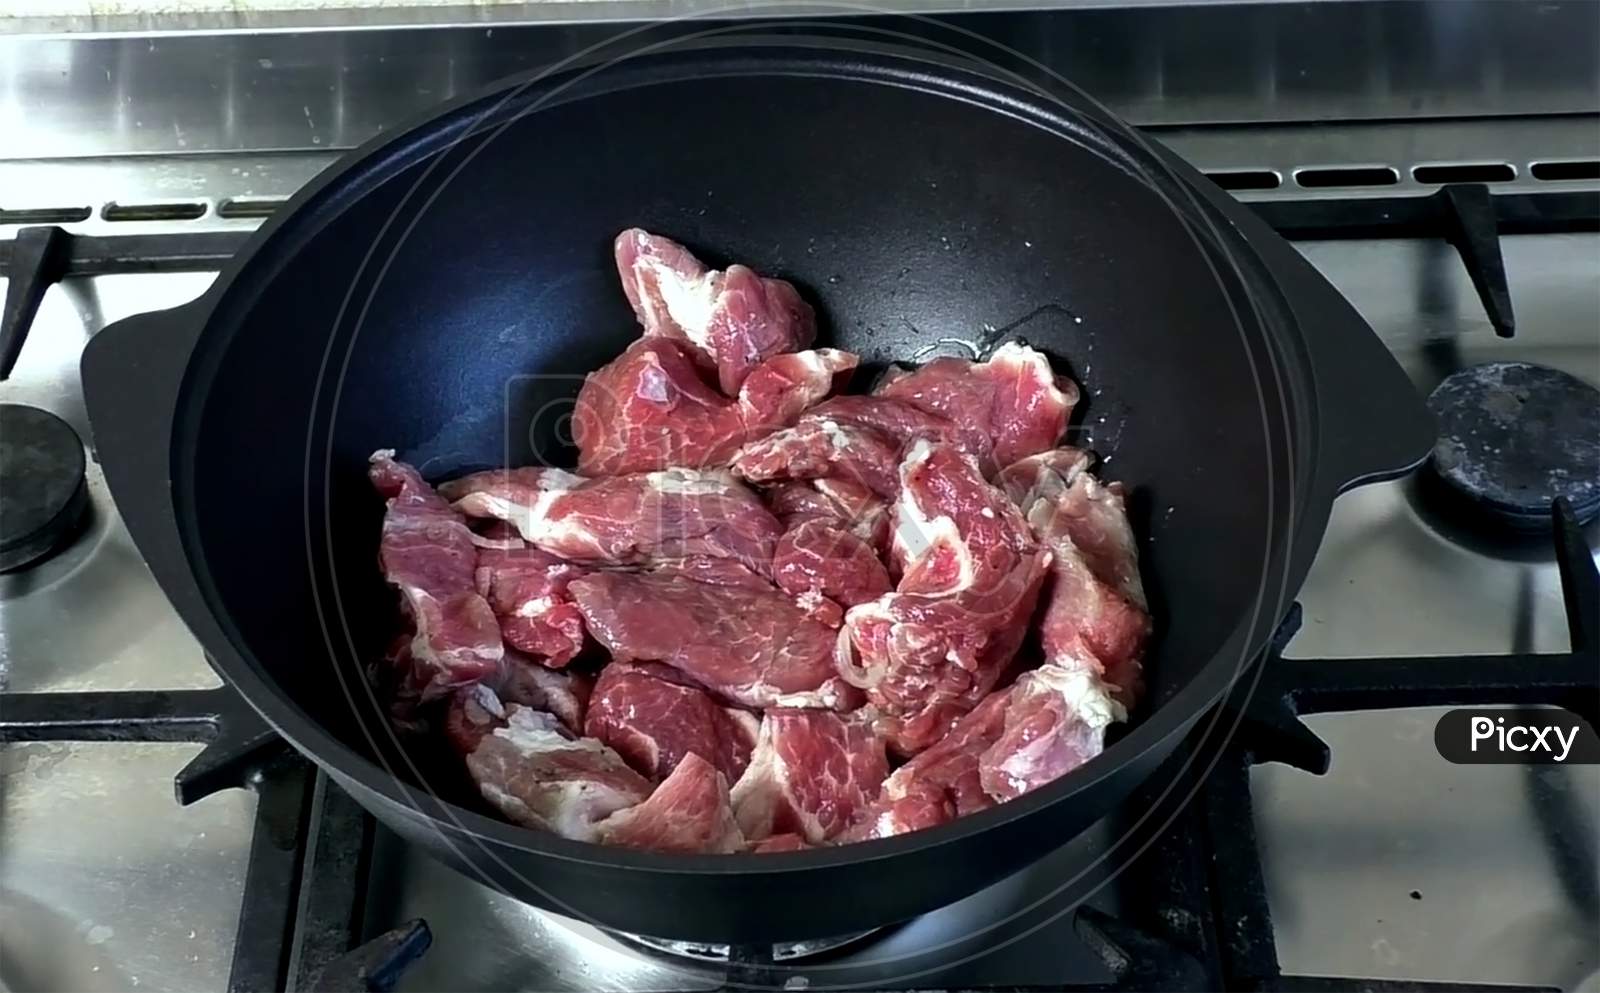 Meat On Pan Image